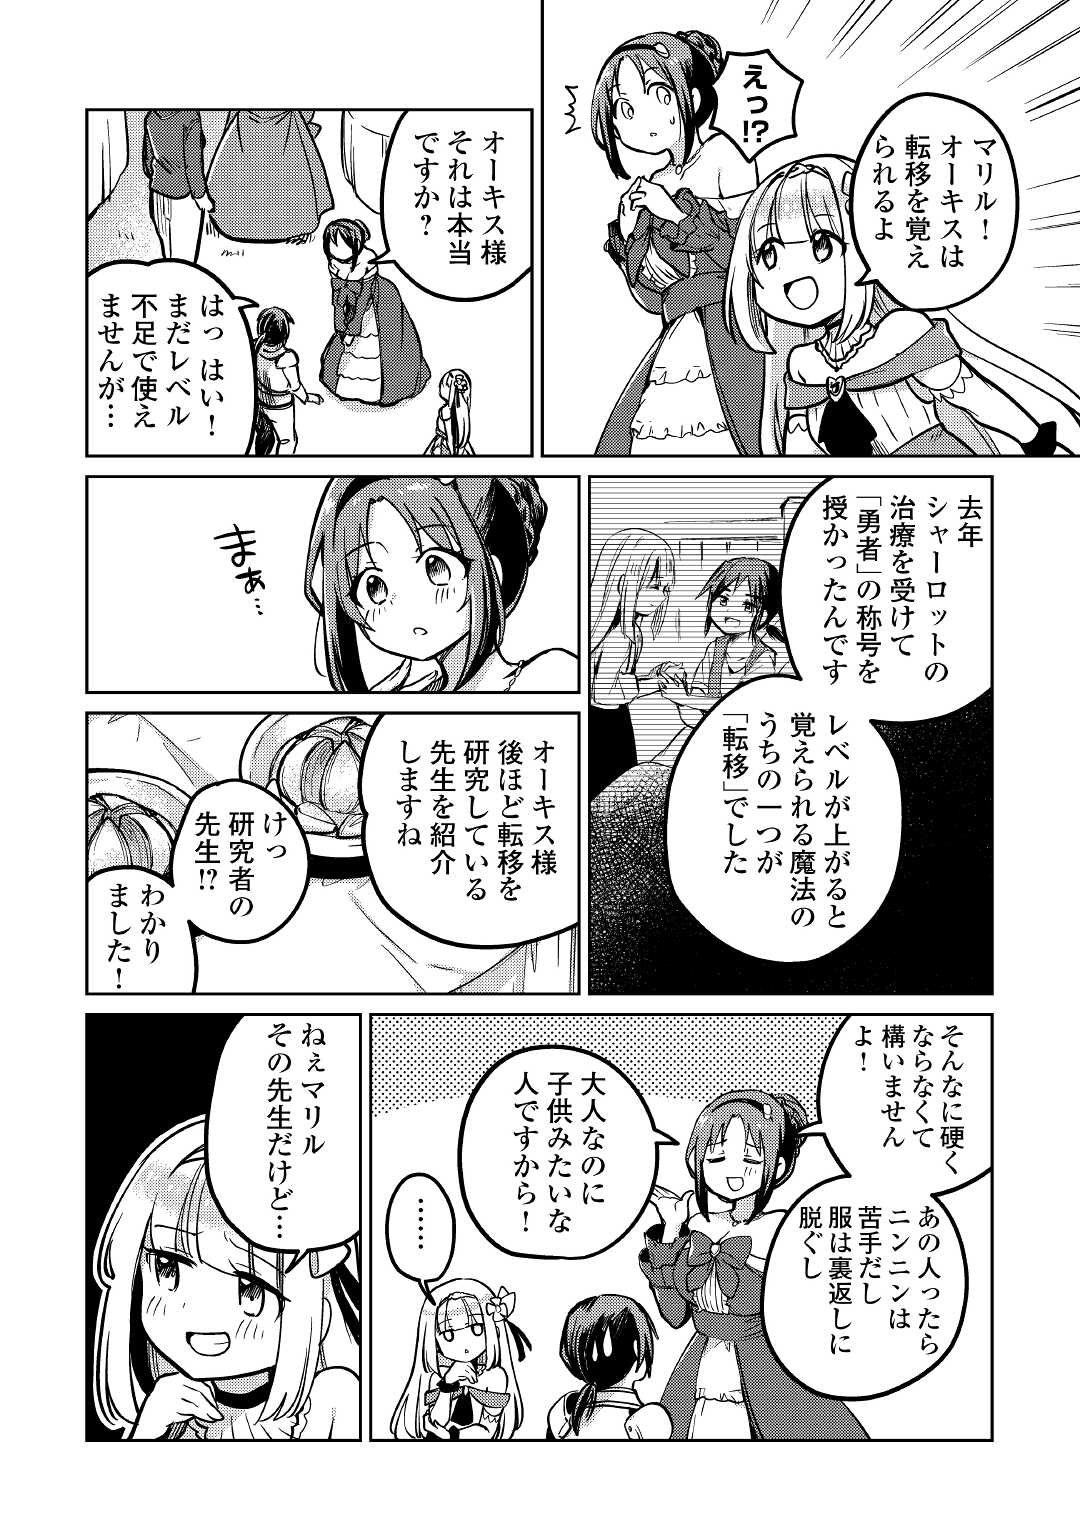 The Former Structural Researcher’s Story of Otherworldly Adventure 第42話 - Page 8